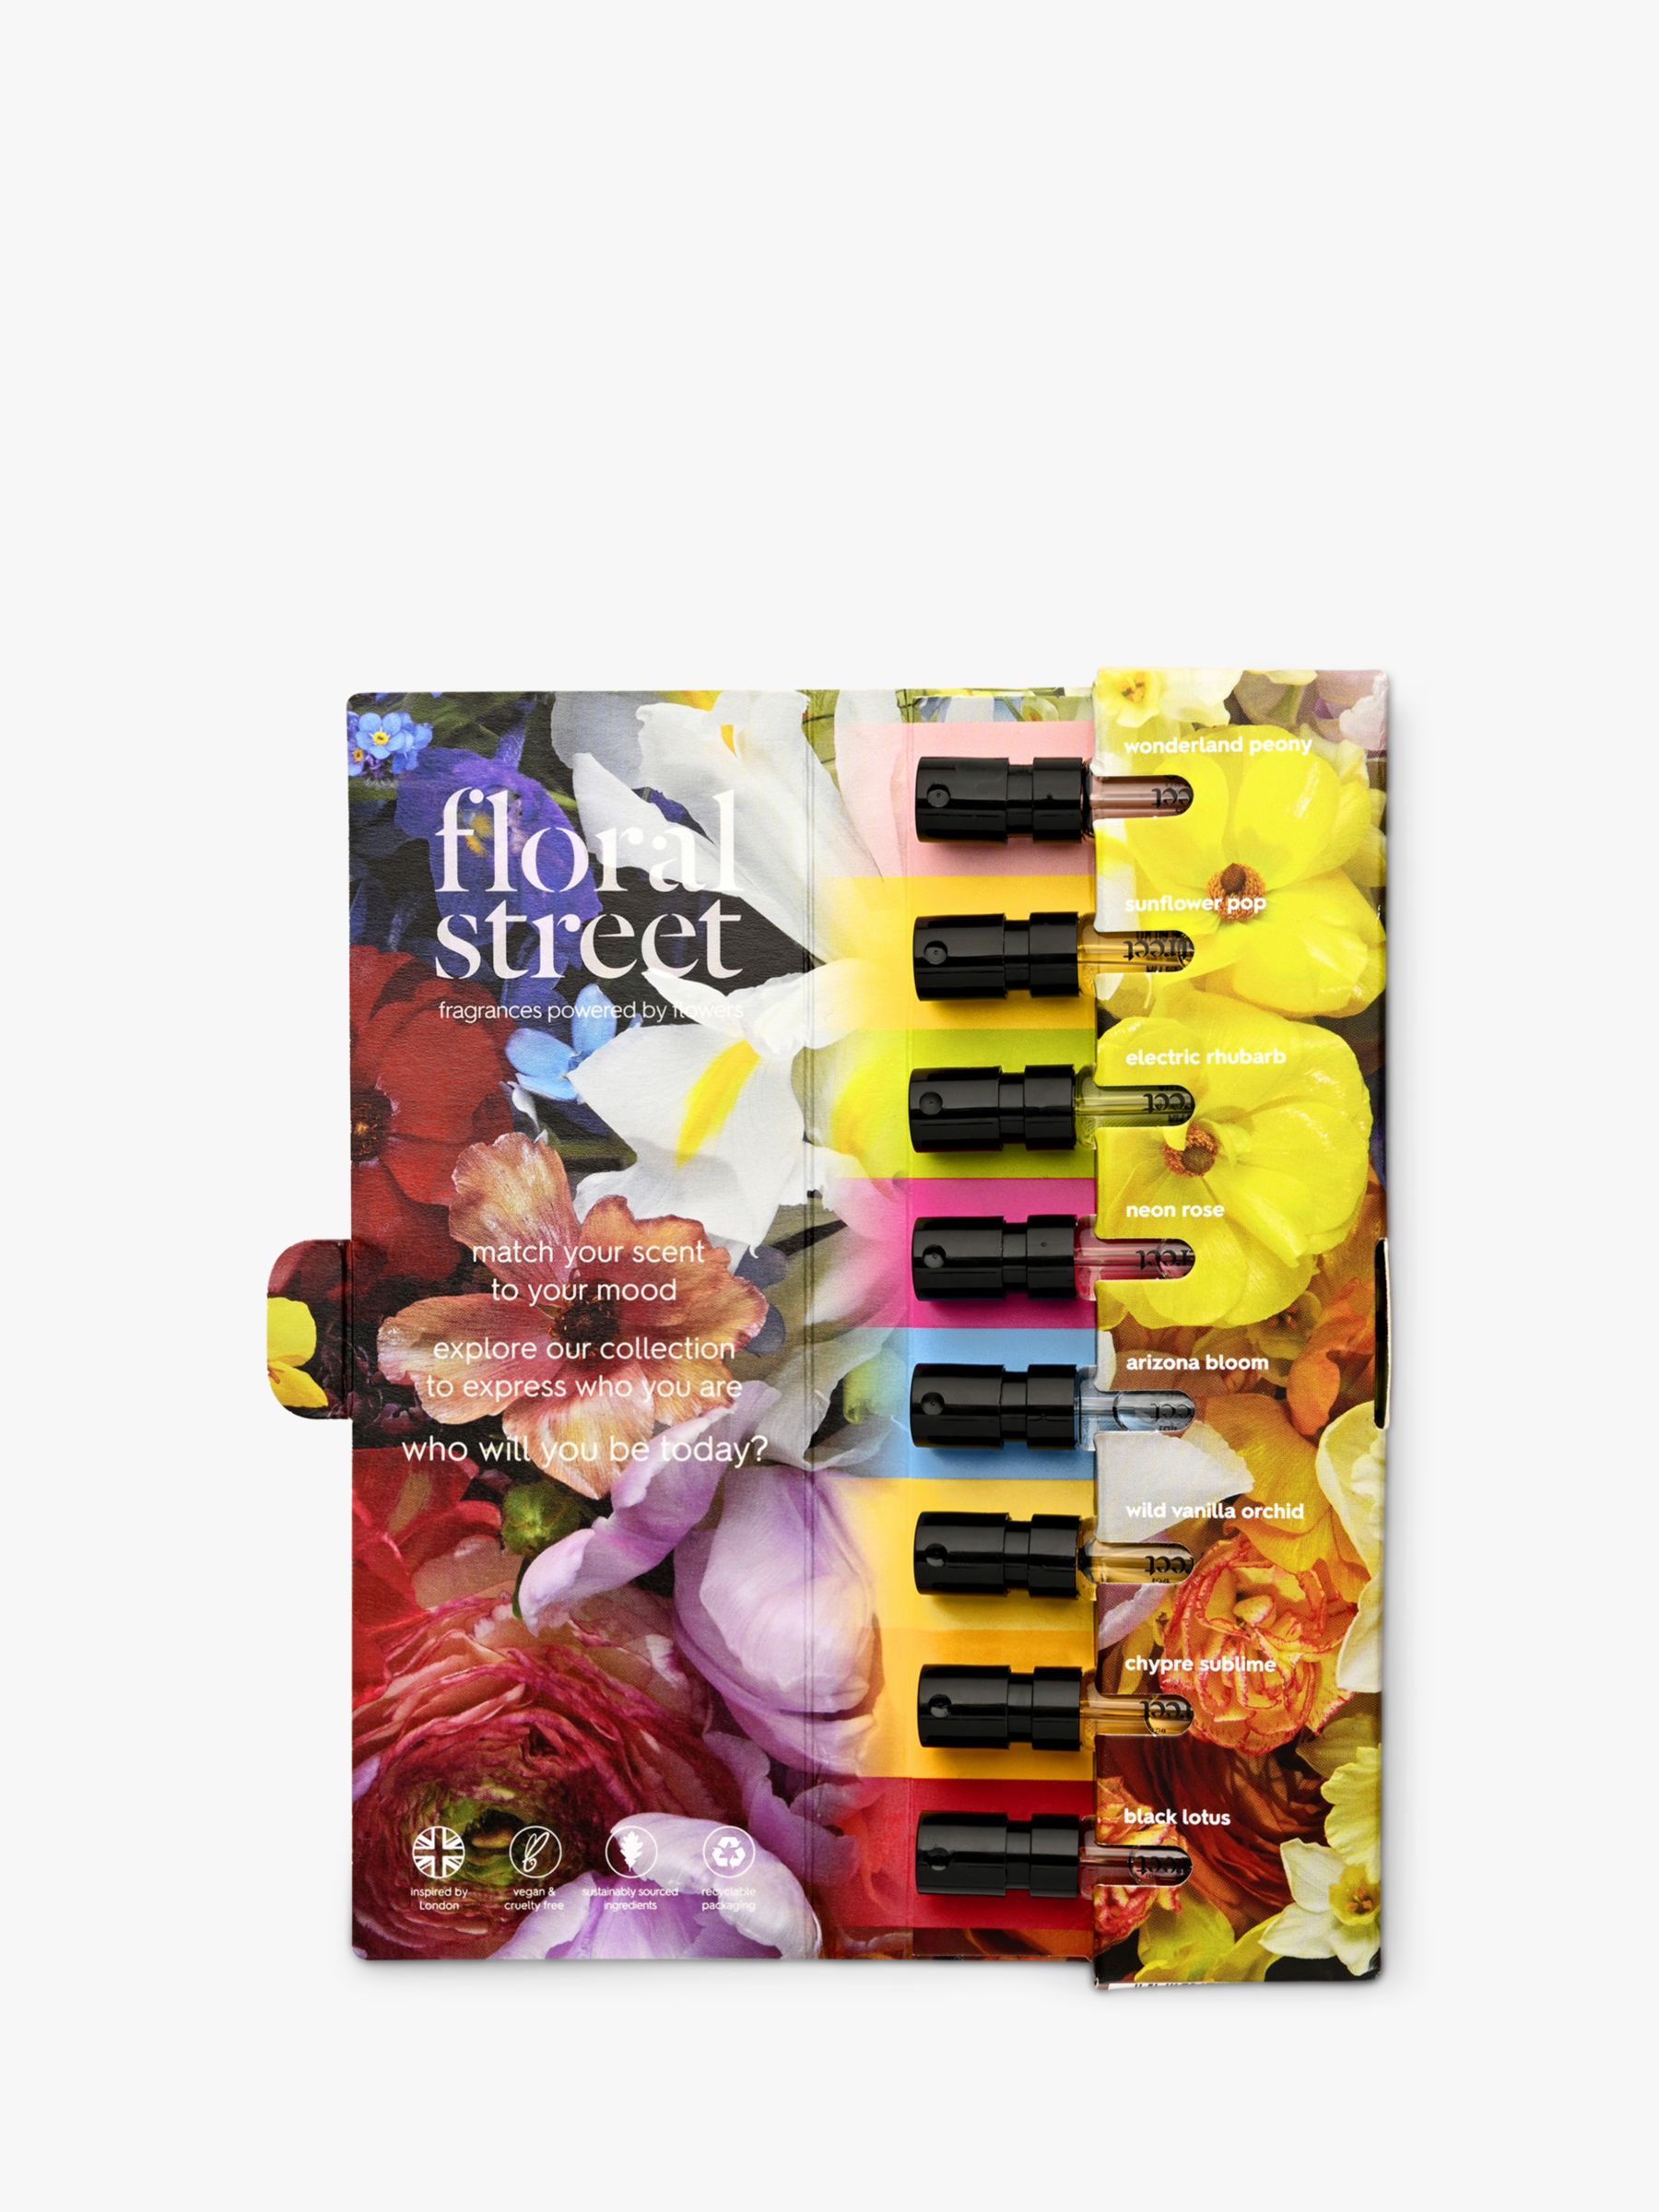 Floral Street Fragrance Discovery Gift Set at John Lewis & Partners